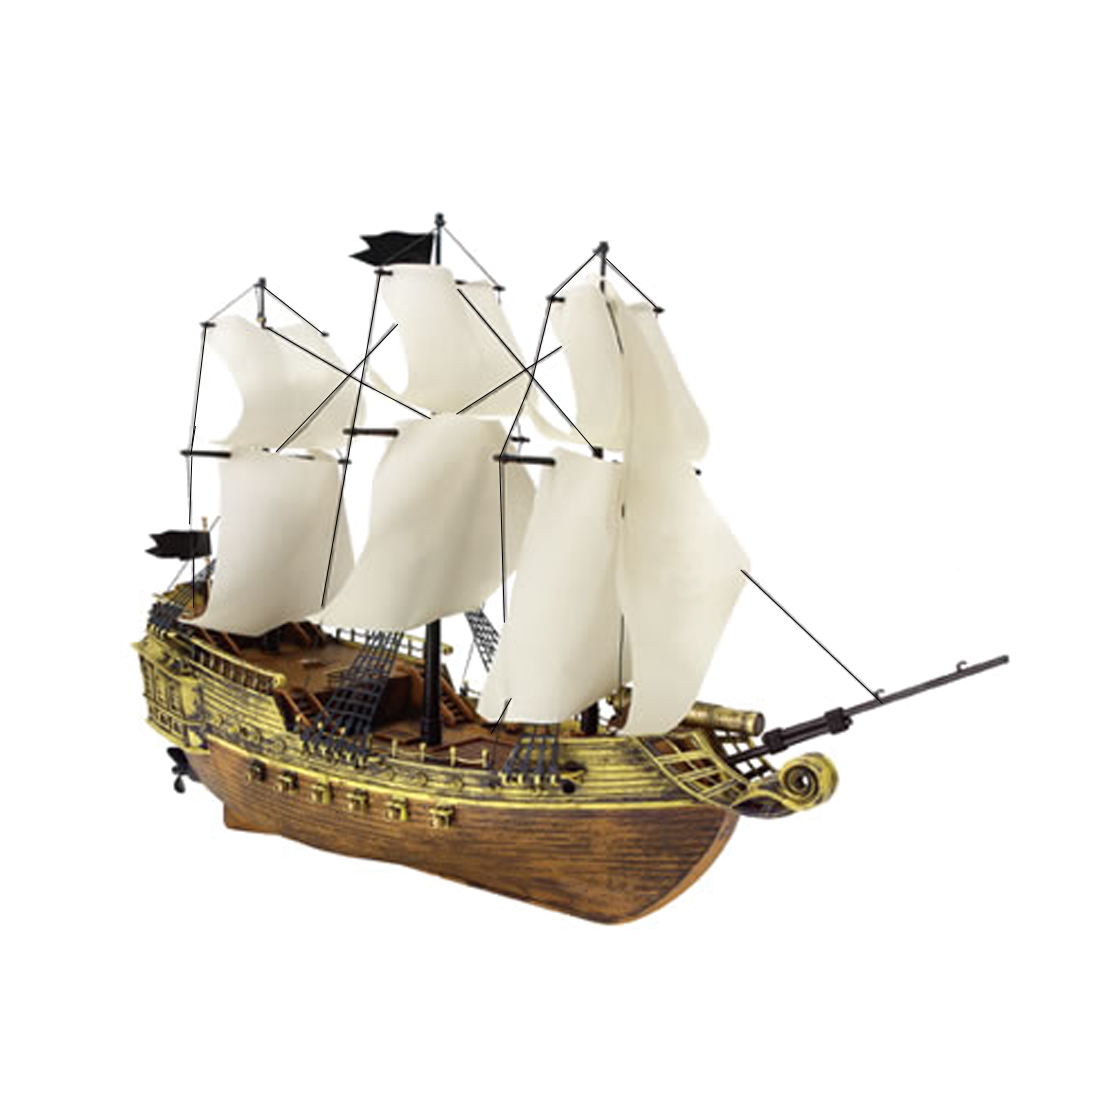 Piracy Ship Boat PNG Image in High Definition